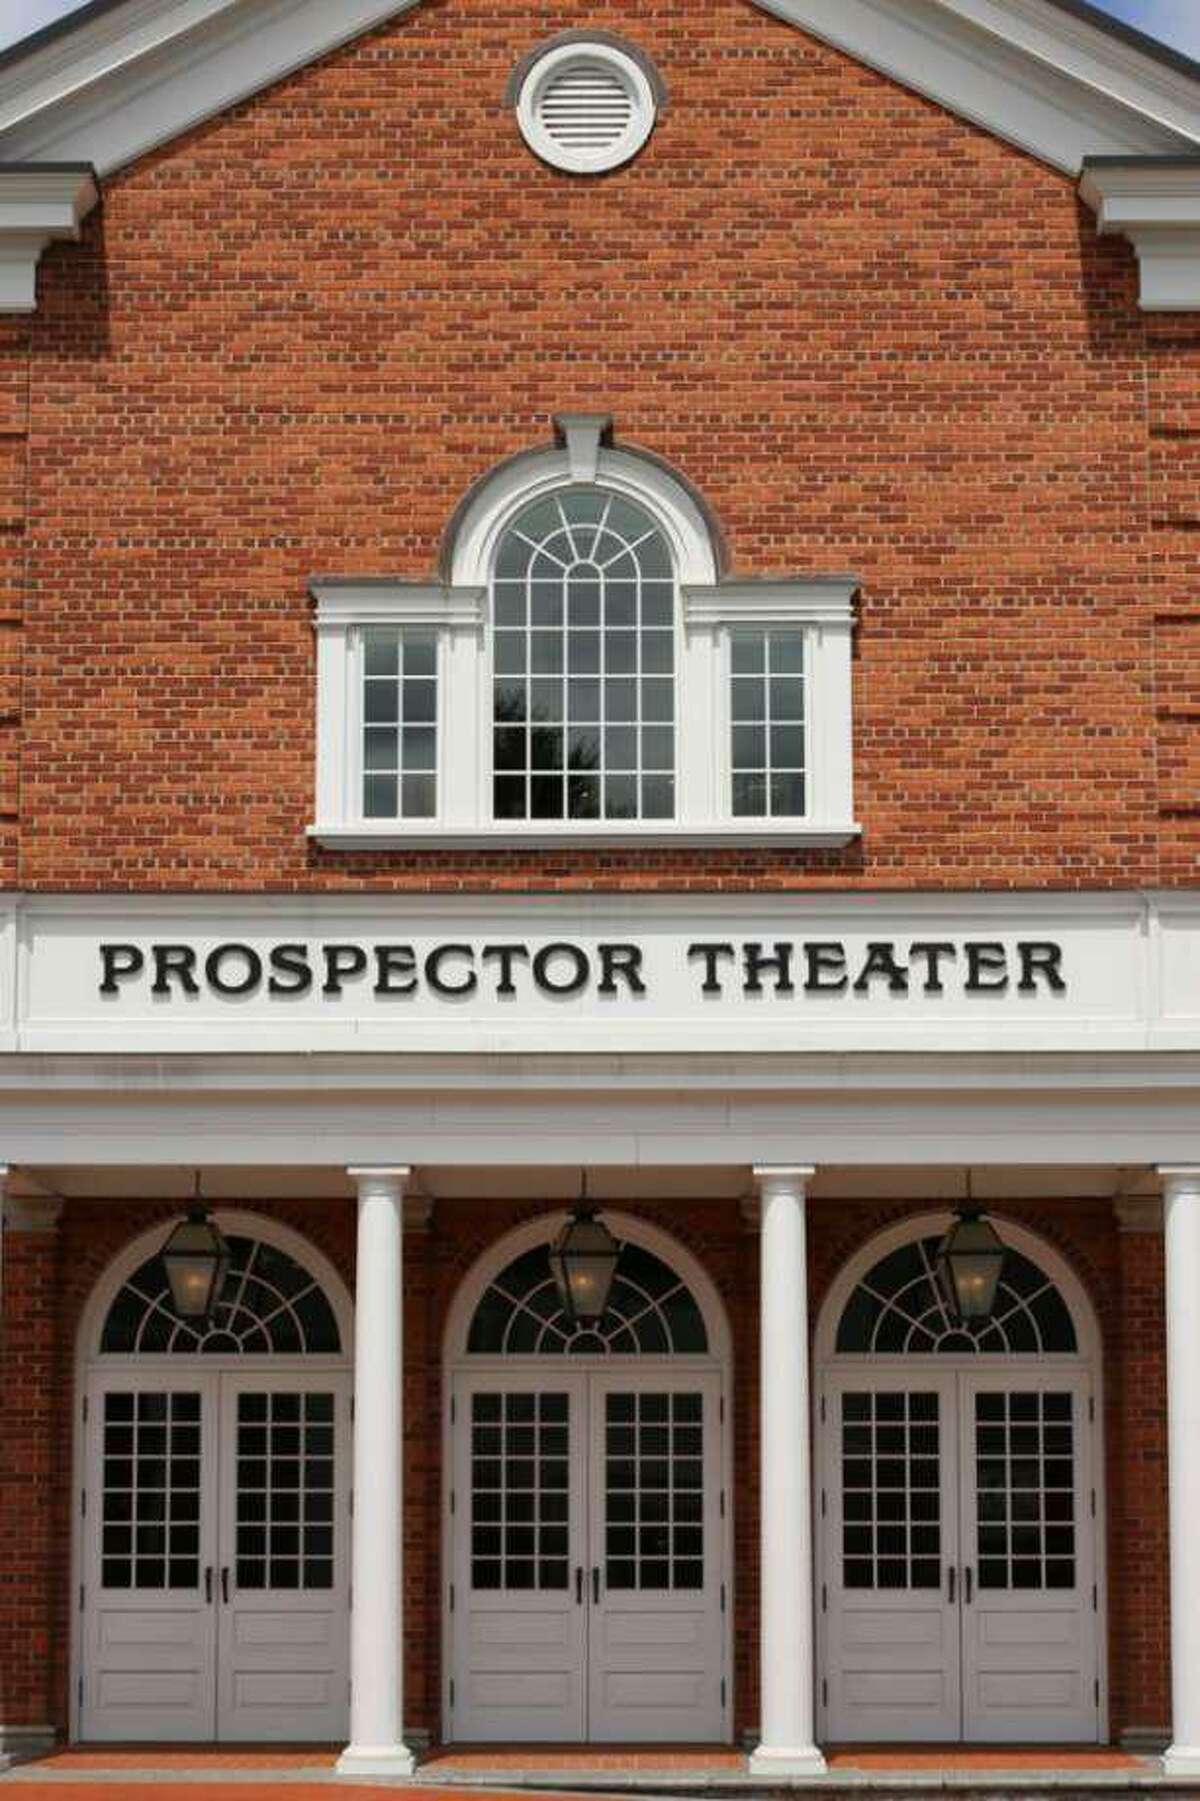 The founder of the Prospector Theater in Ridgefield is hinting about opening a second theater in Wilton.